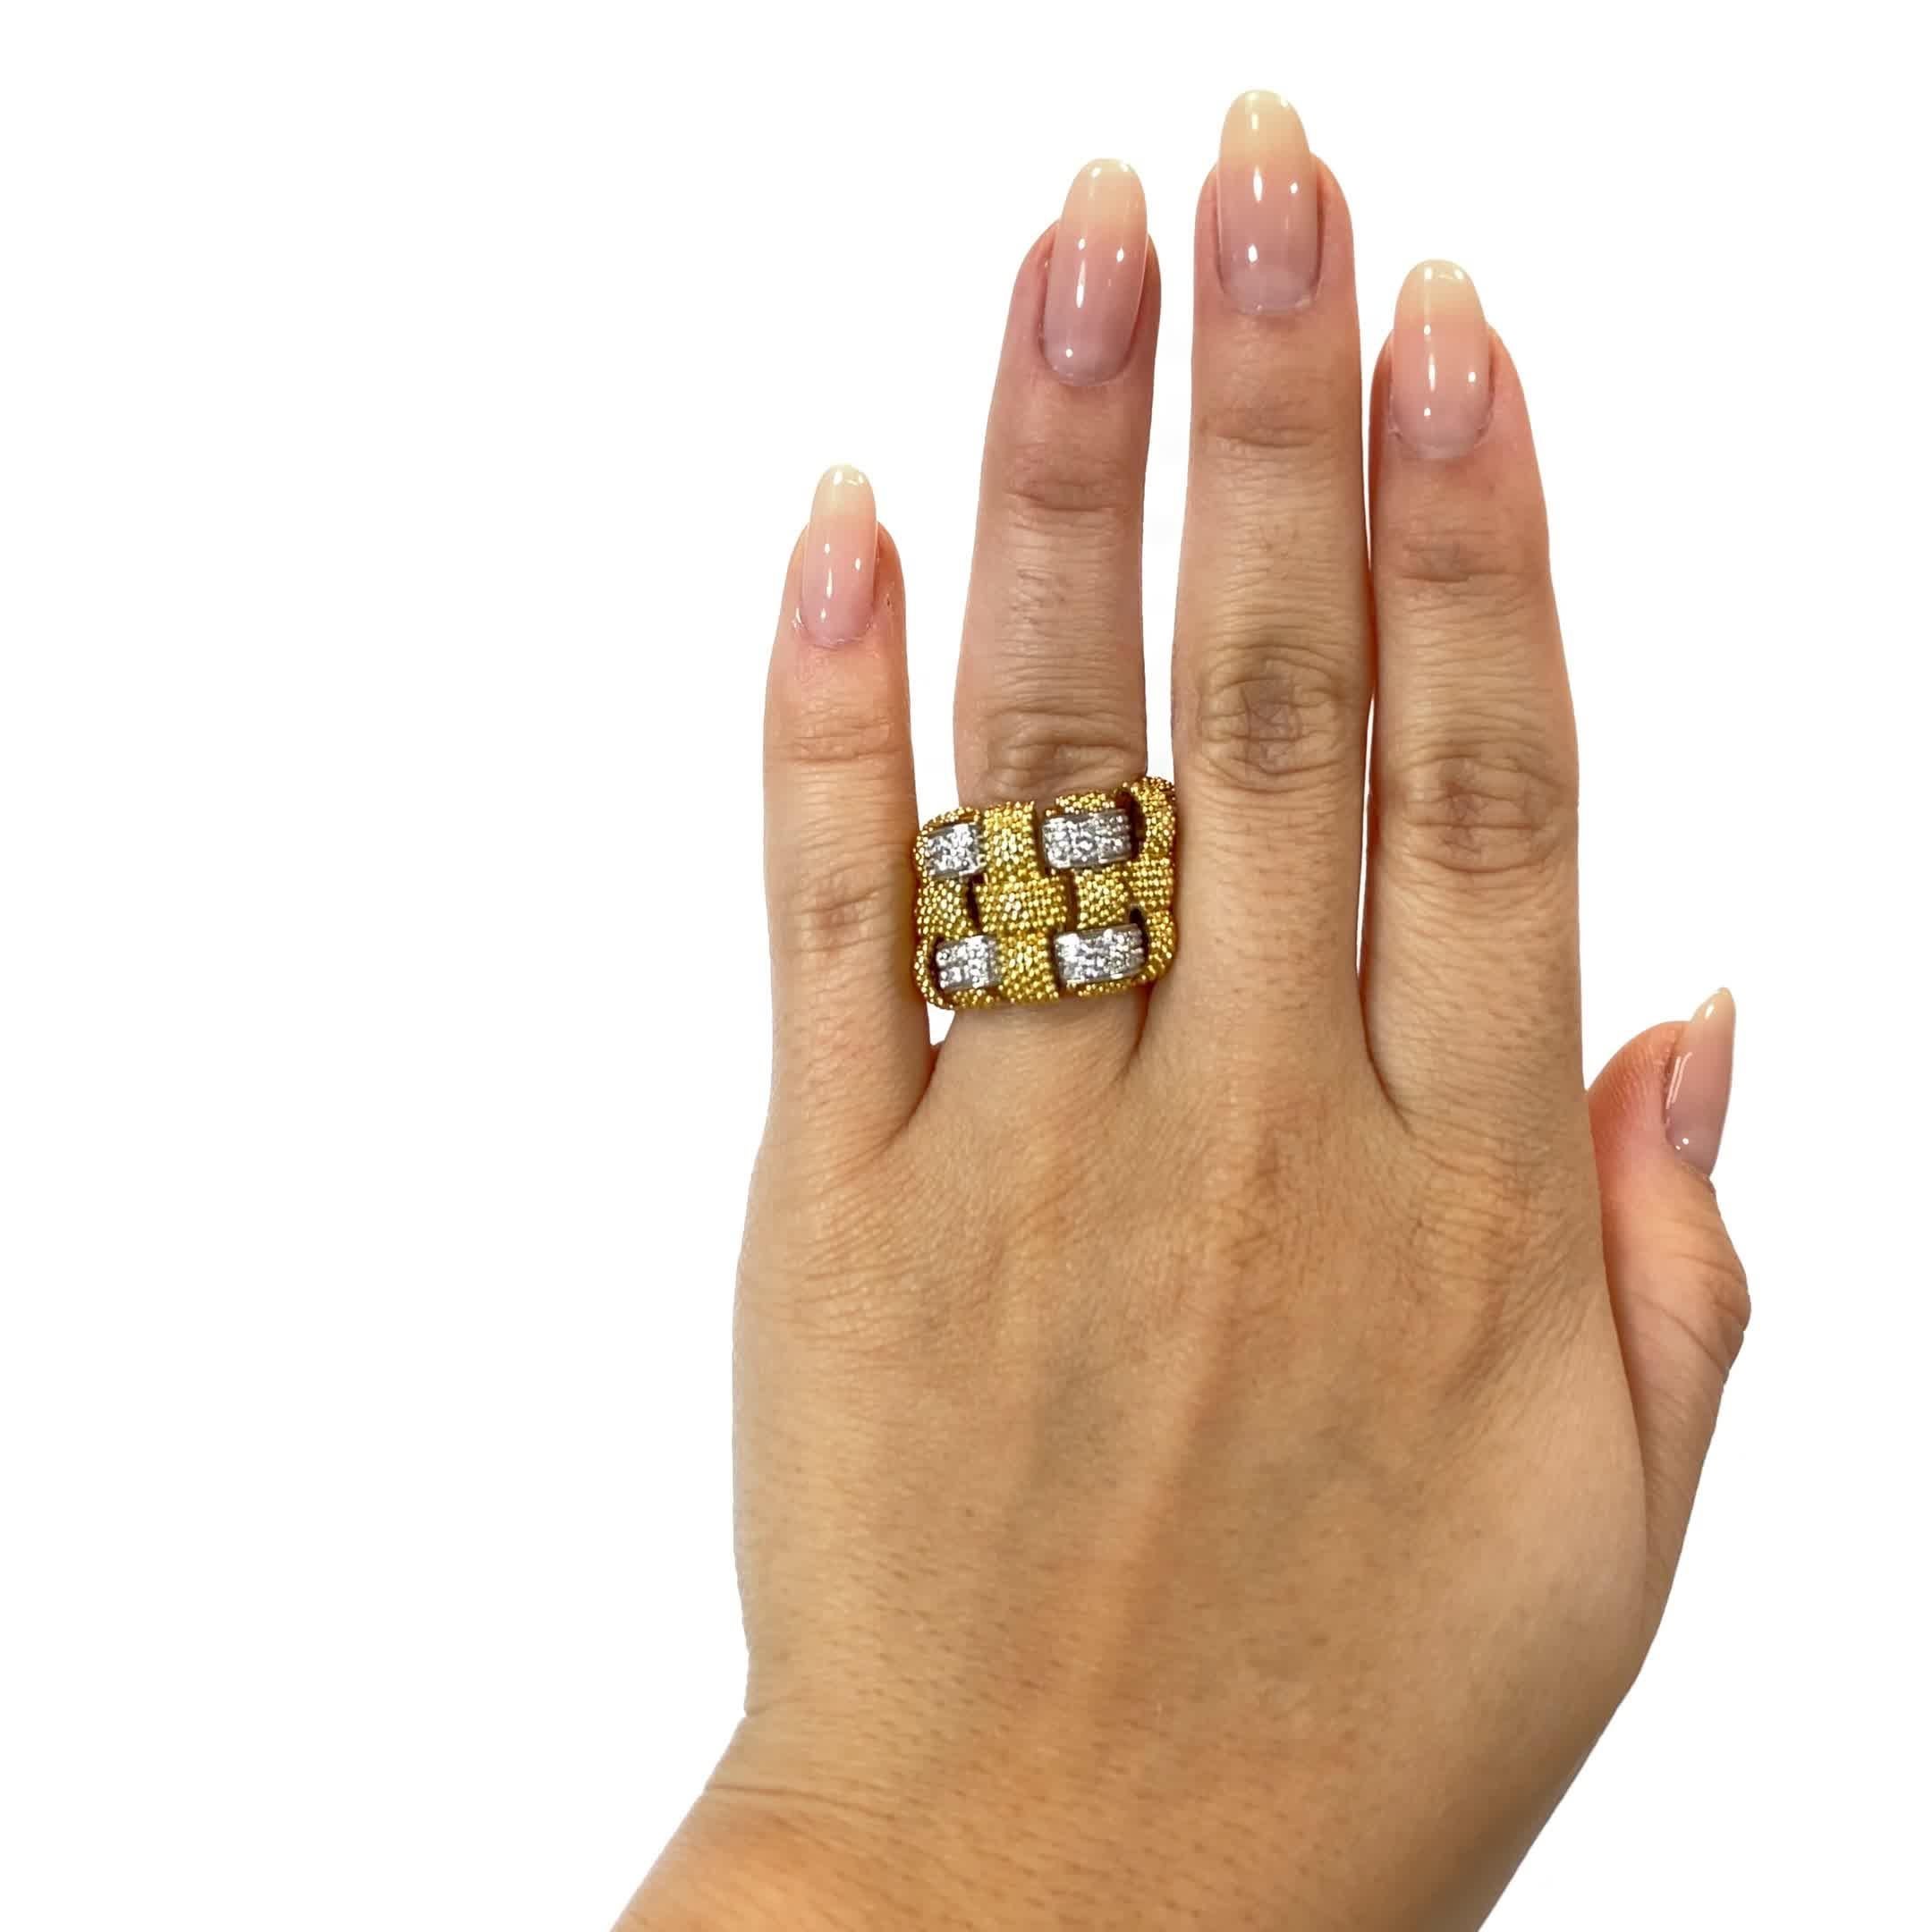 Vintage Roberto Coin Appassionata Diamond 18 Karat Gold Ring. The ring features 96 Round Brilliant Cut diamonds approximately 1.00 carat total, D-E color. Signed RC with Italian hallmarks. Circa 2000s. Size 7 and may be re-sized.

About The Piece: